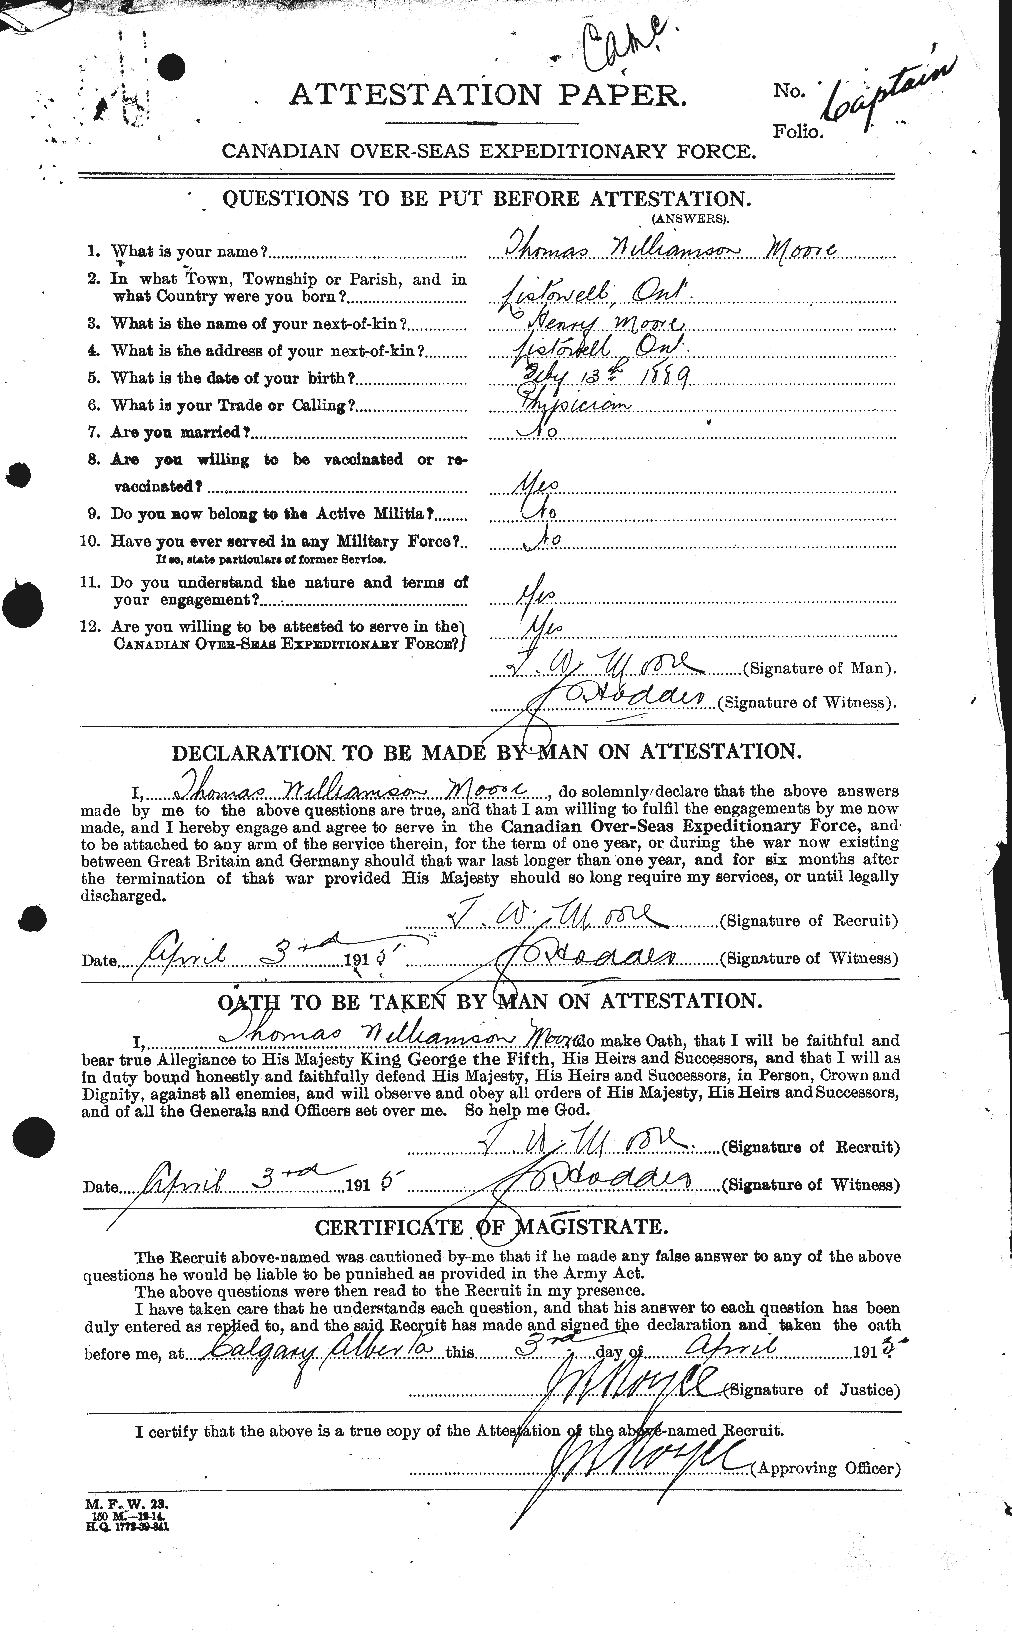 Personnel Records of the First World War - CEF 505677a